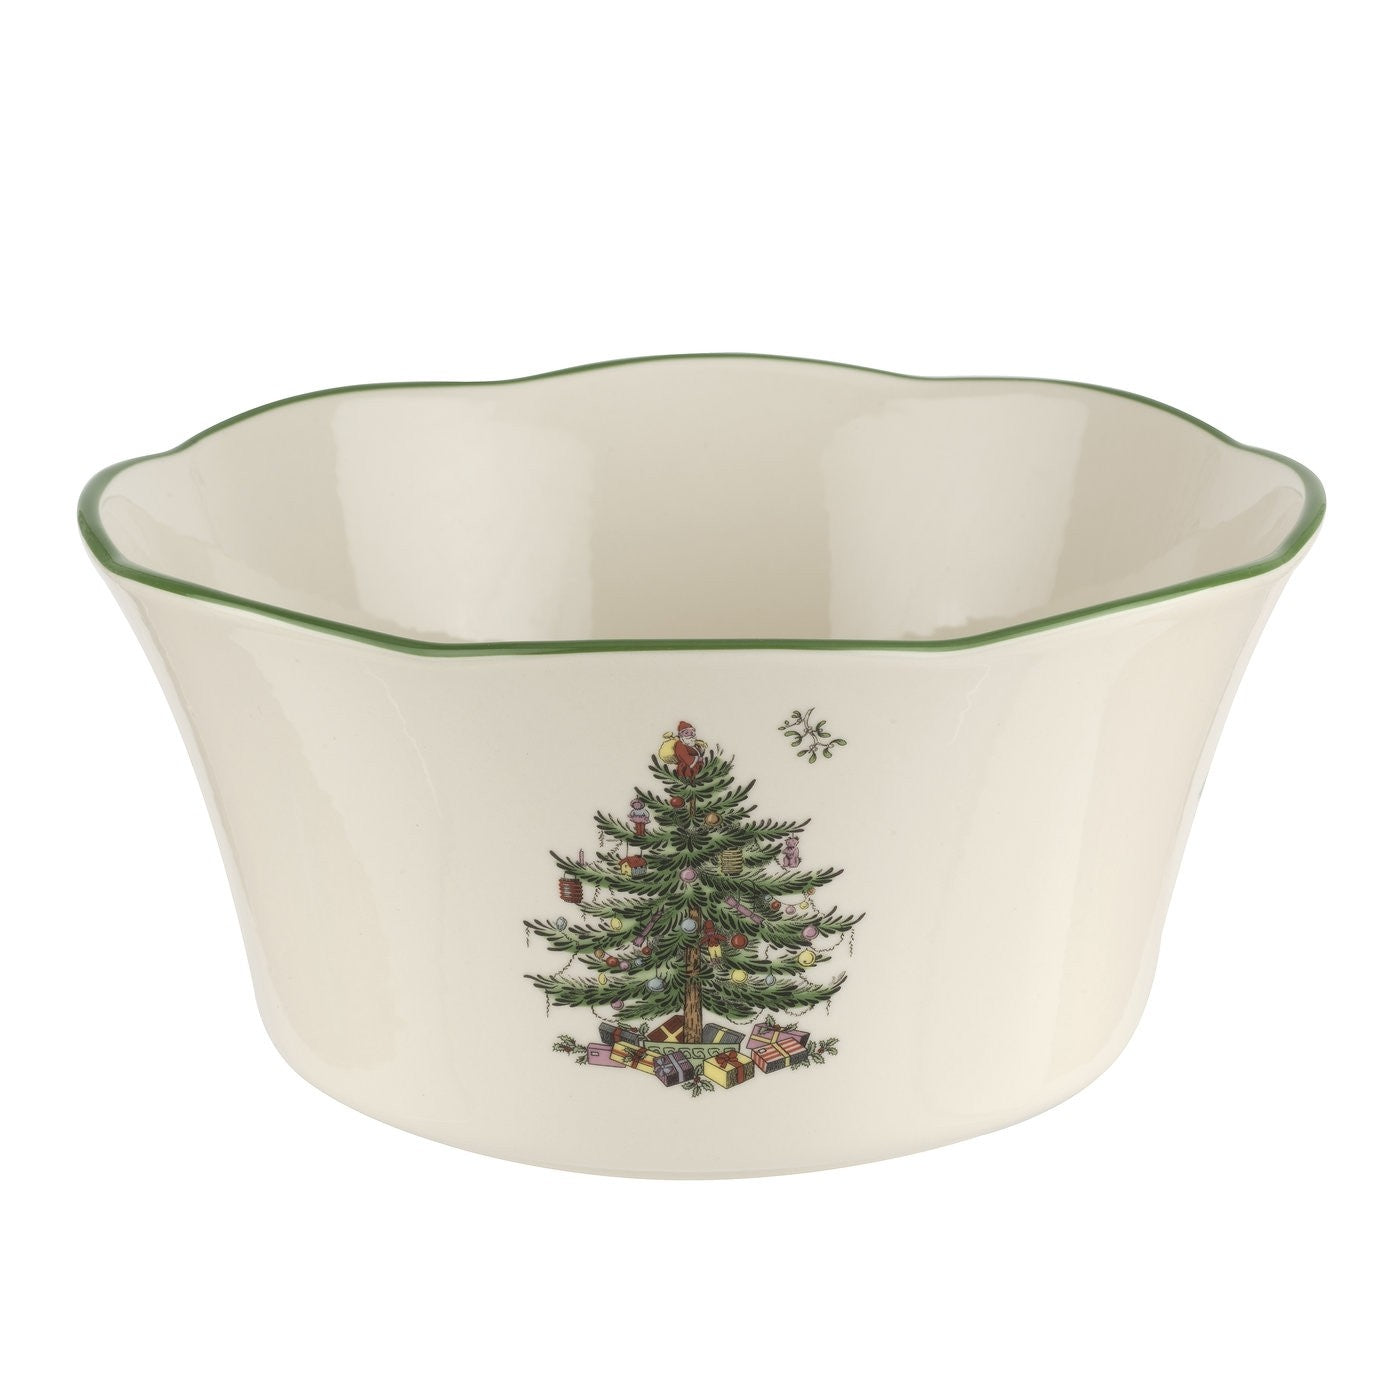 Christmas Tree Flared Scalloped Bowl 8.25inch